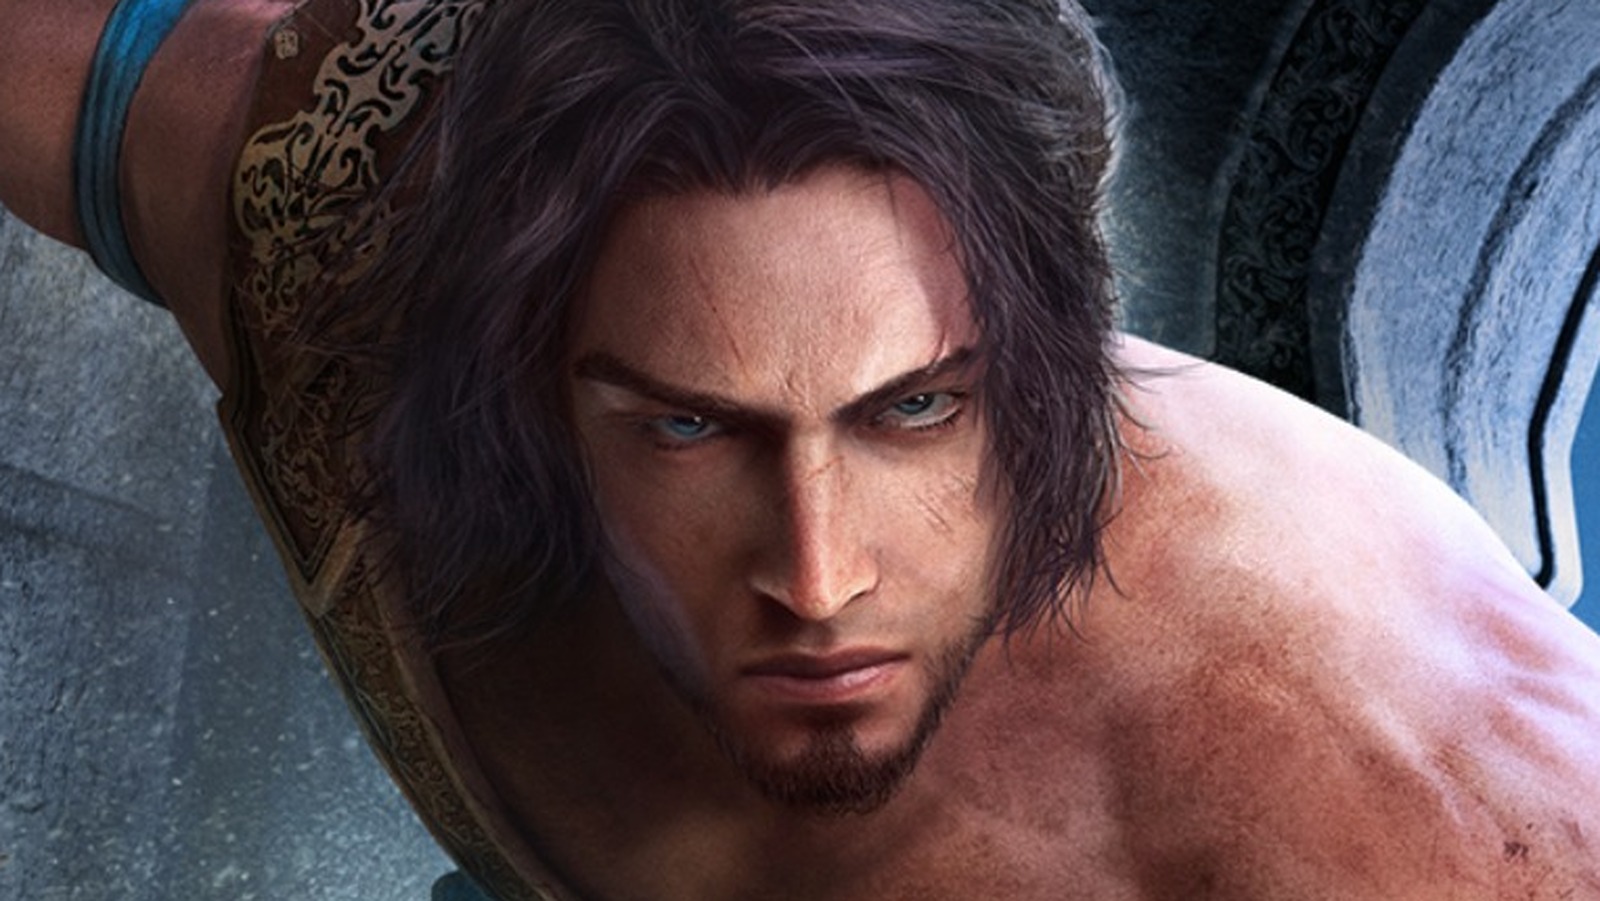 Prince Of Persia: The Sands Of Time Remake Still In Development